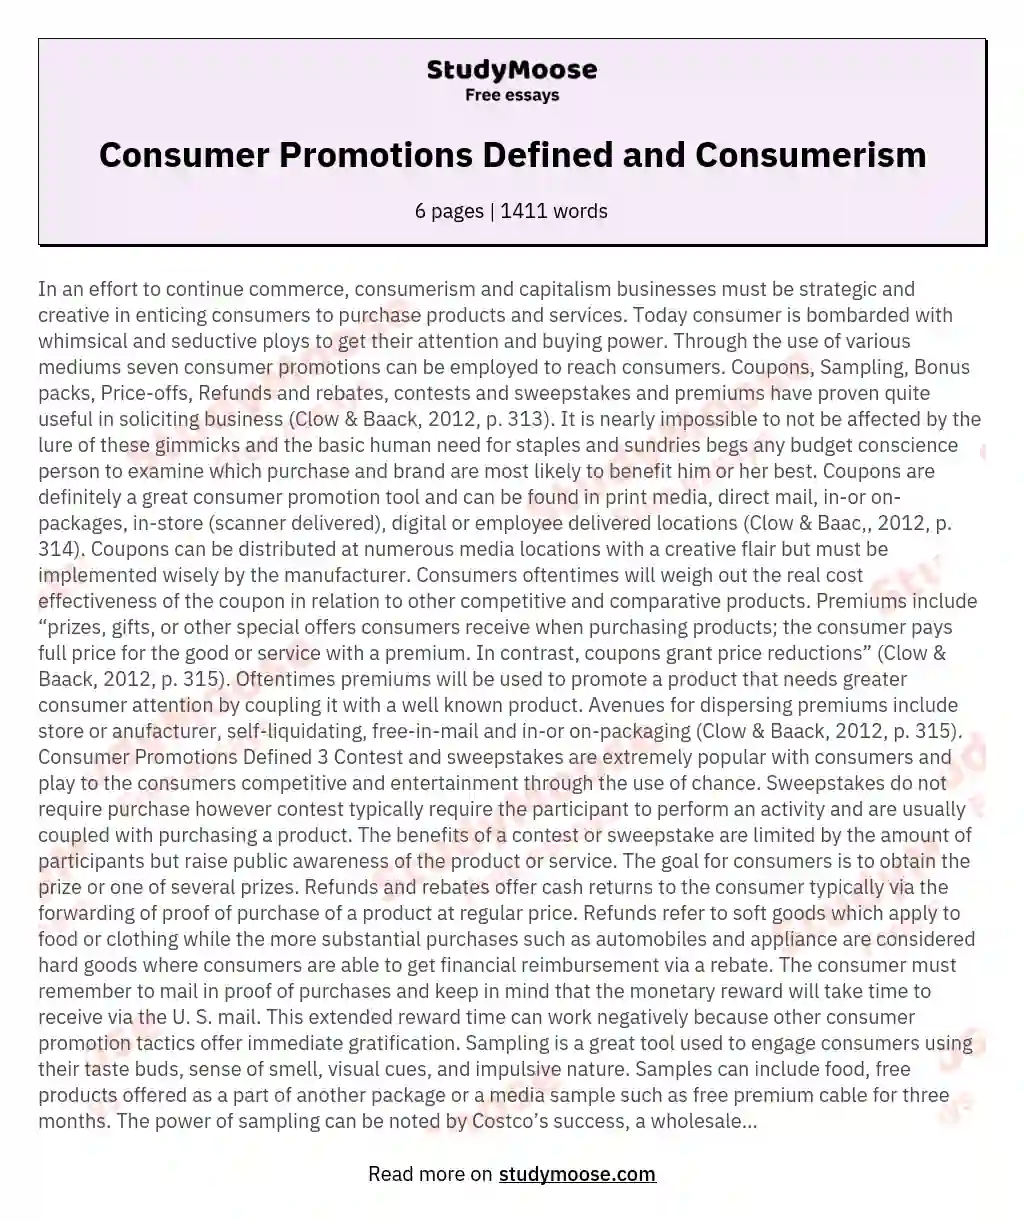 Consumer Promotions Defined and Consumerism